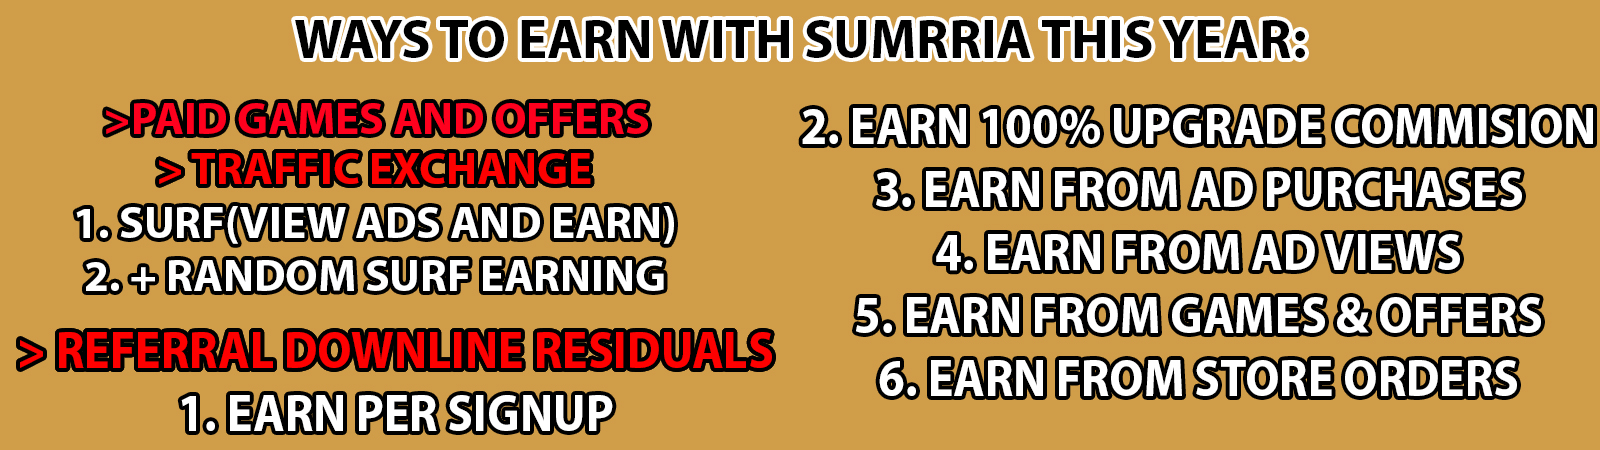 ways to earn with sumrria banner